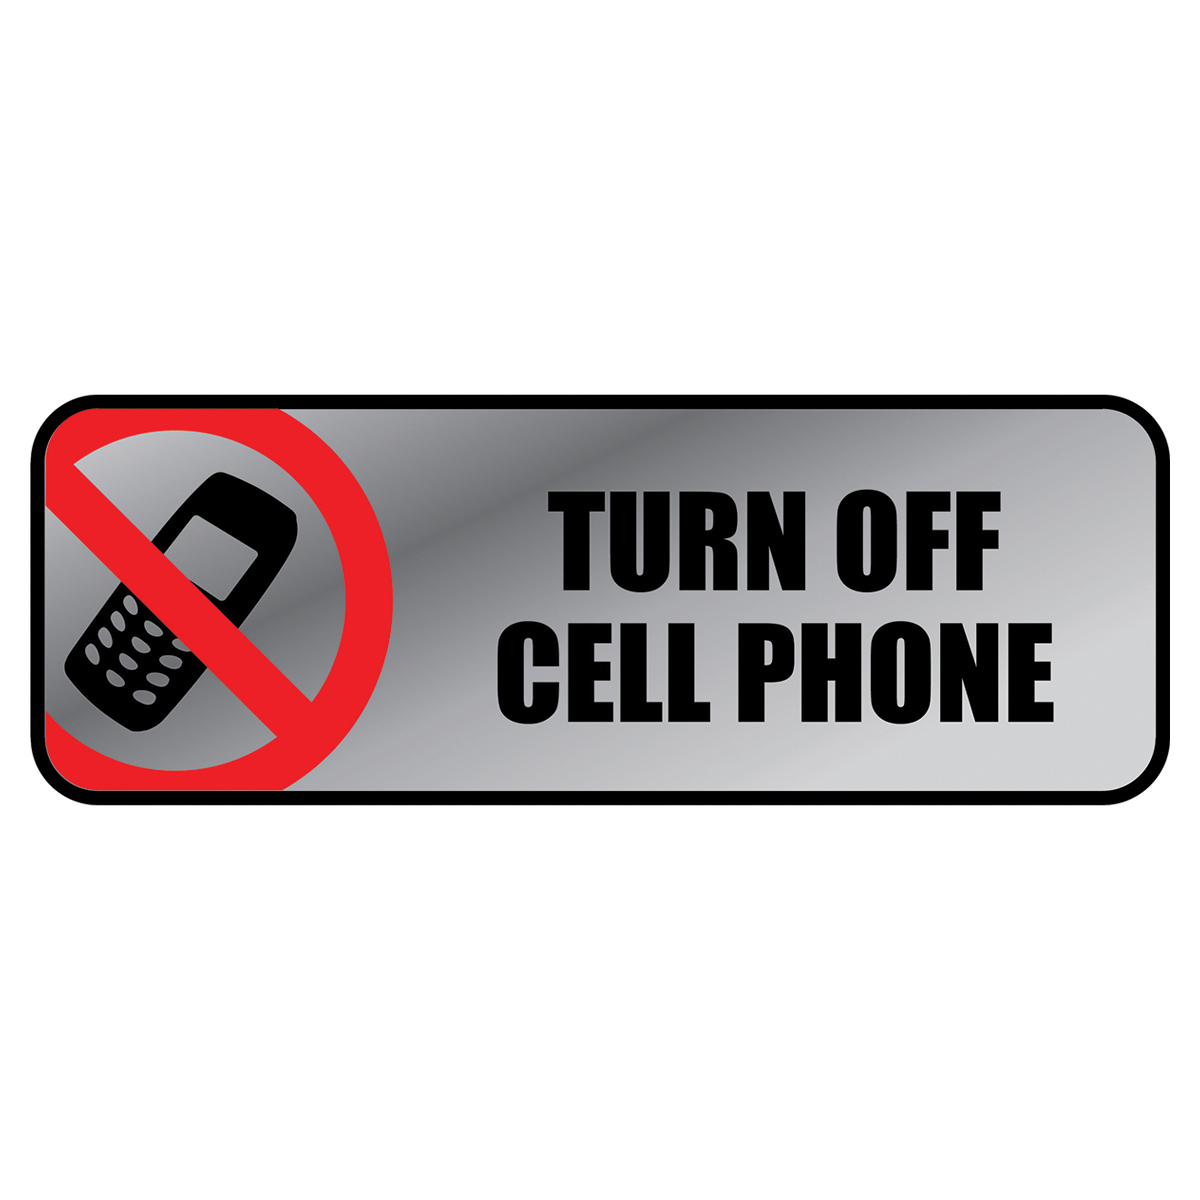 TURN OFF CELL PHONE - Metal Sign - 098211